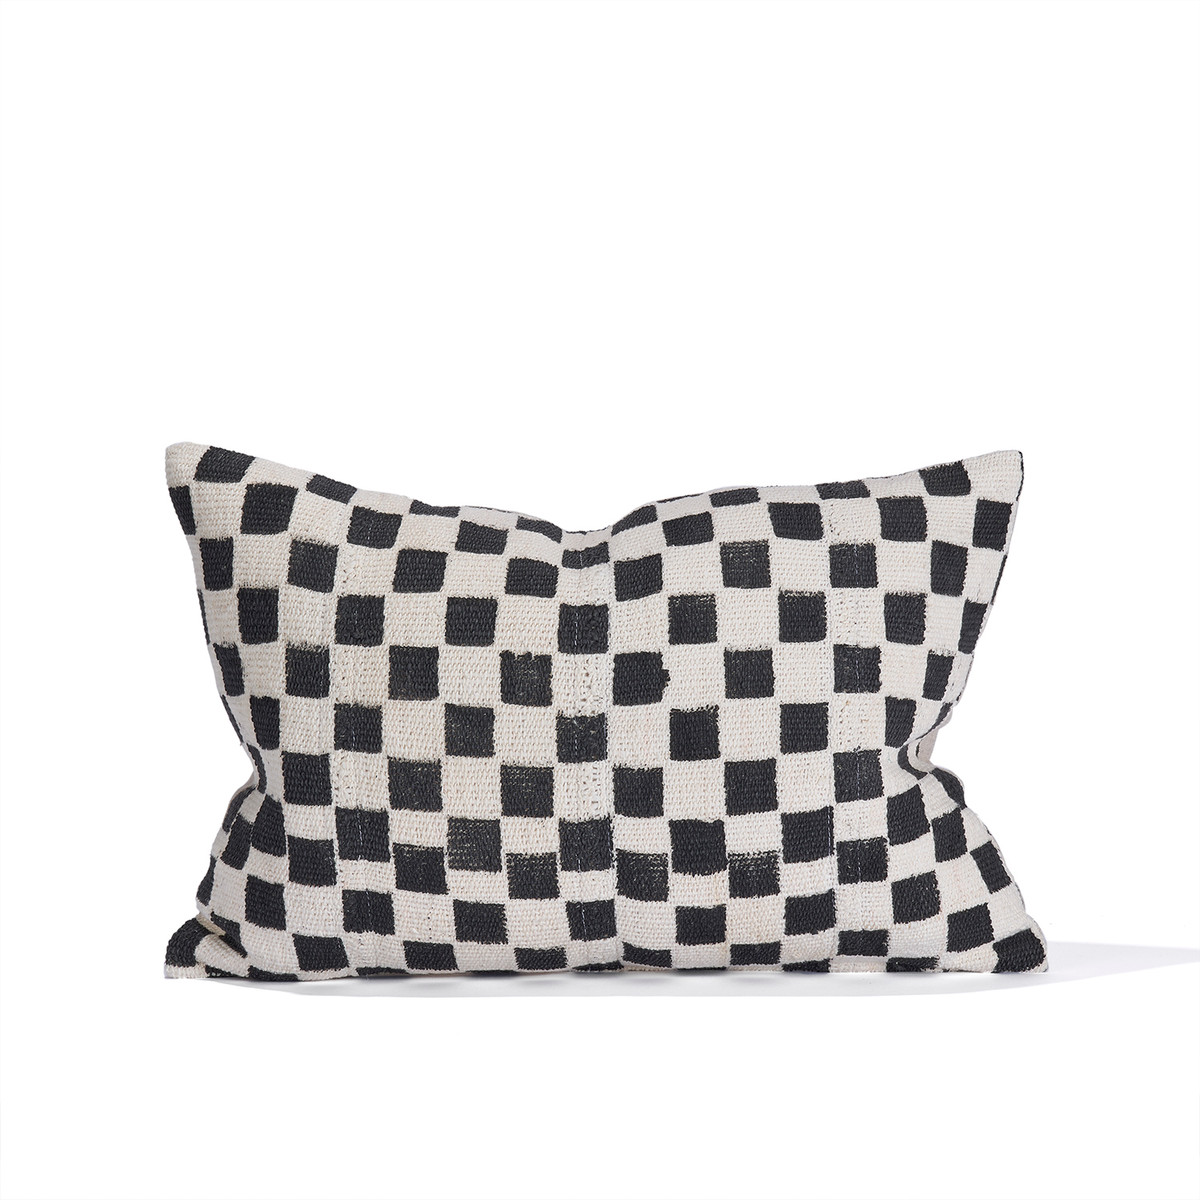 Pleasing 1420 Lumbar Pillow - White and Black Mud Cloth Pillow - Front